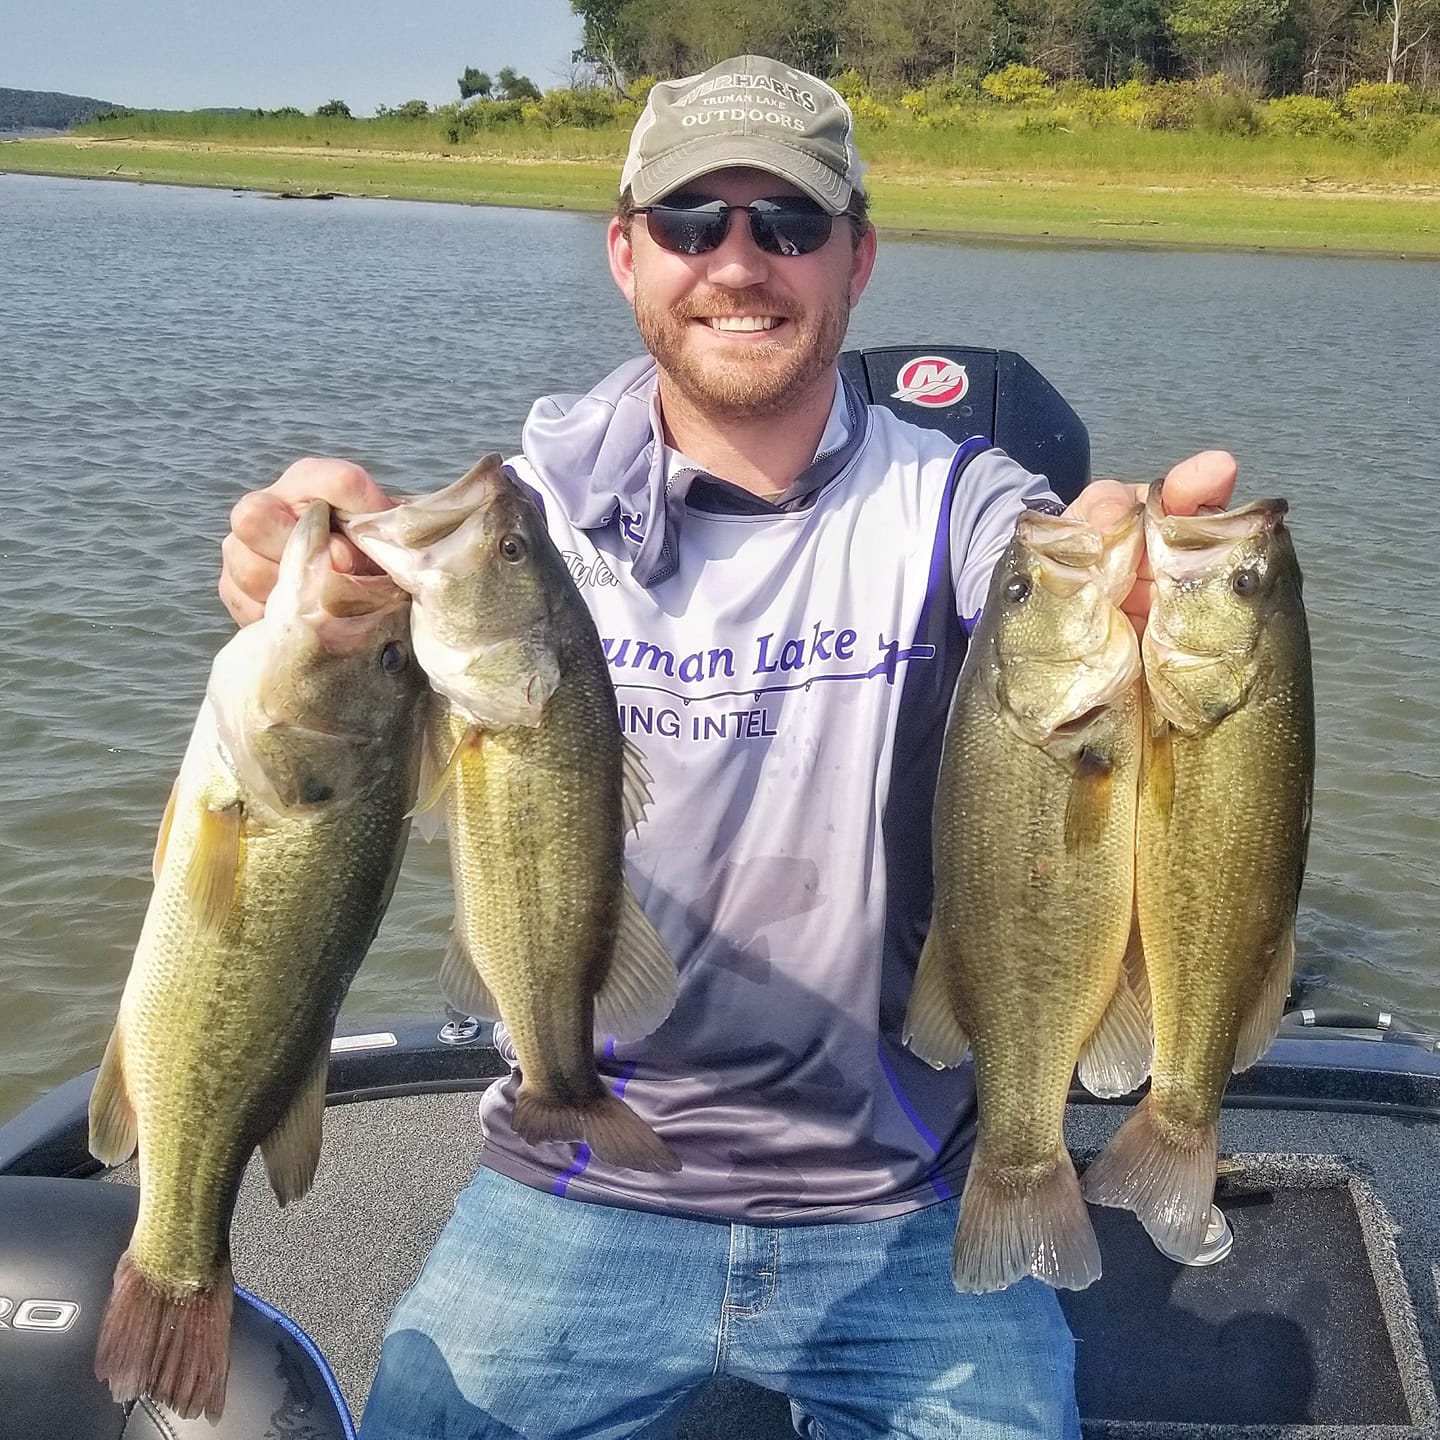 Truman Lake Bass Fishing - everything you need is right here